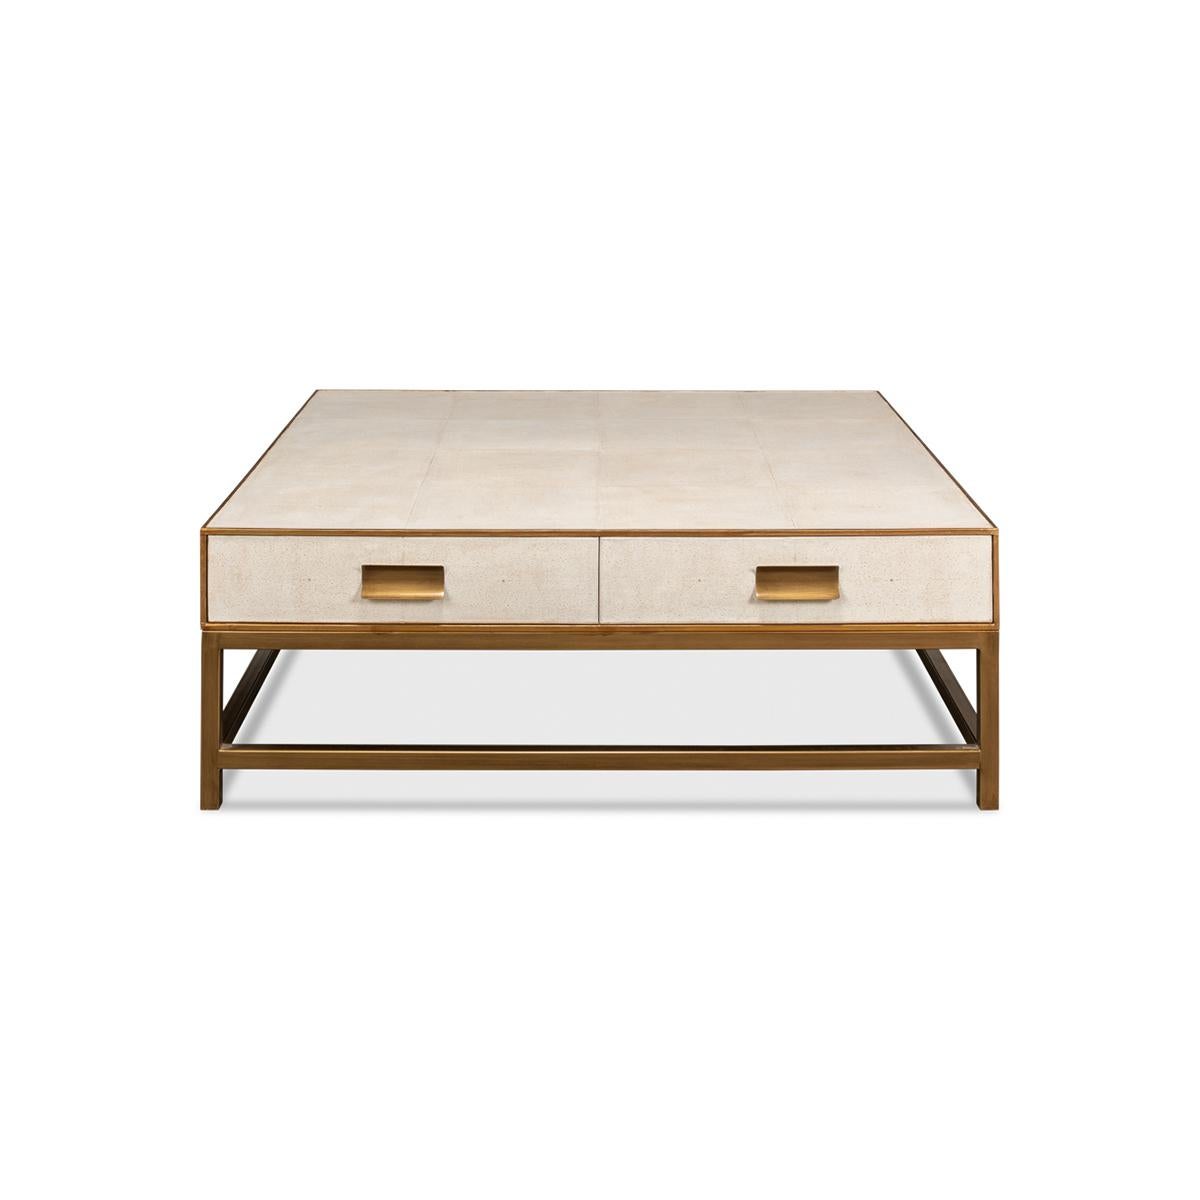 Crafted from wood with a shagreen embossed leather wrapped top, this square coffee table is finished with gold trim and hardware. With two drawers and raised on cube-form base with stretchers. 

The low-profile design makes it ideal for a functional